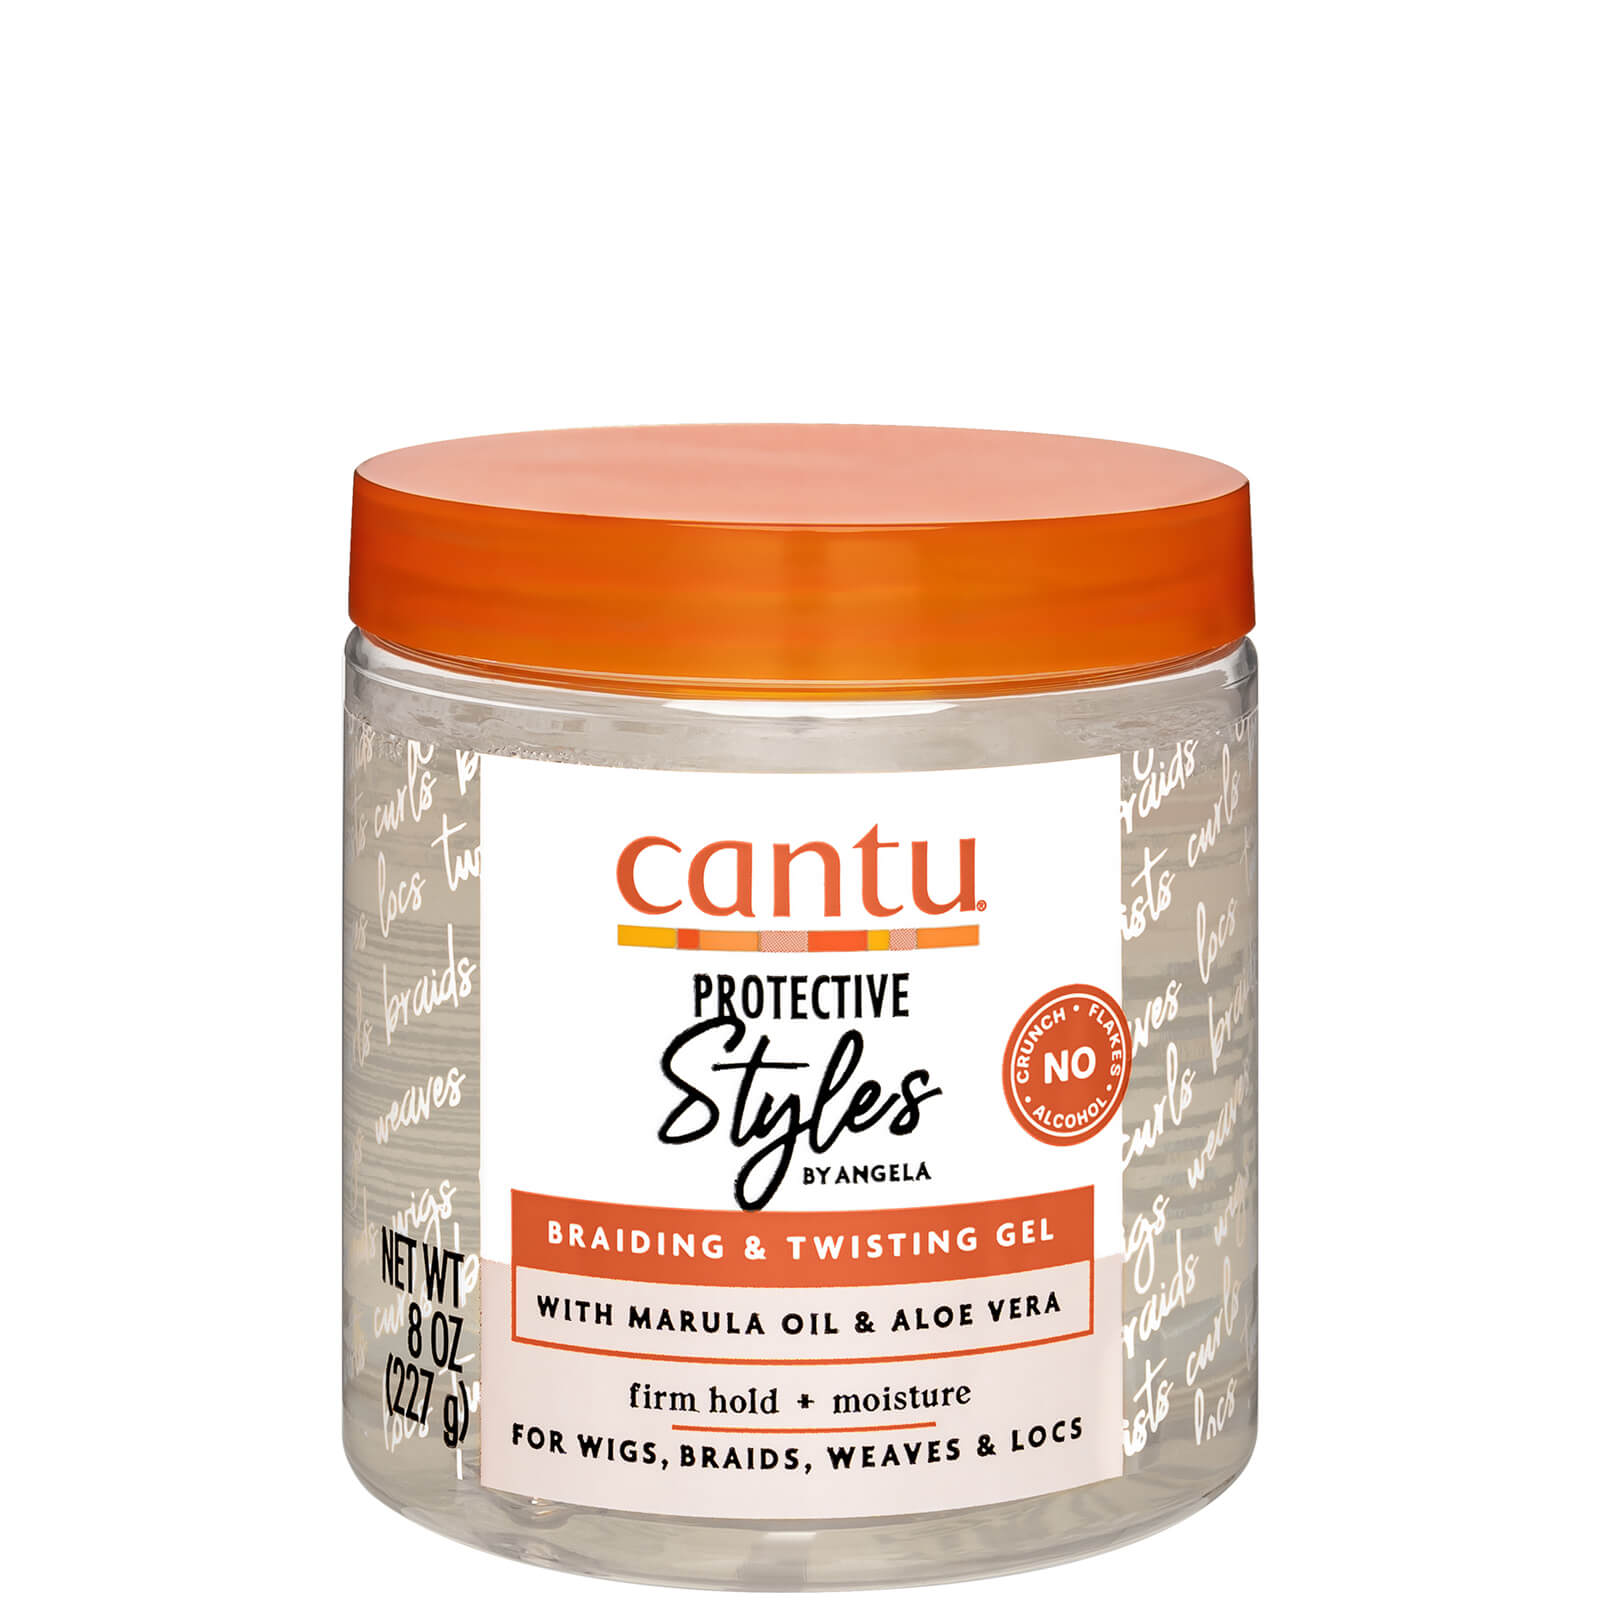 Cantu Protective Styles Braiding And Twisting Gel 227g